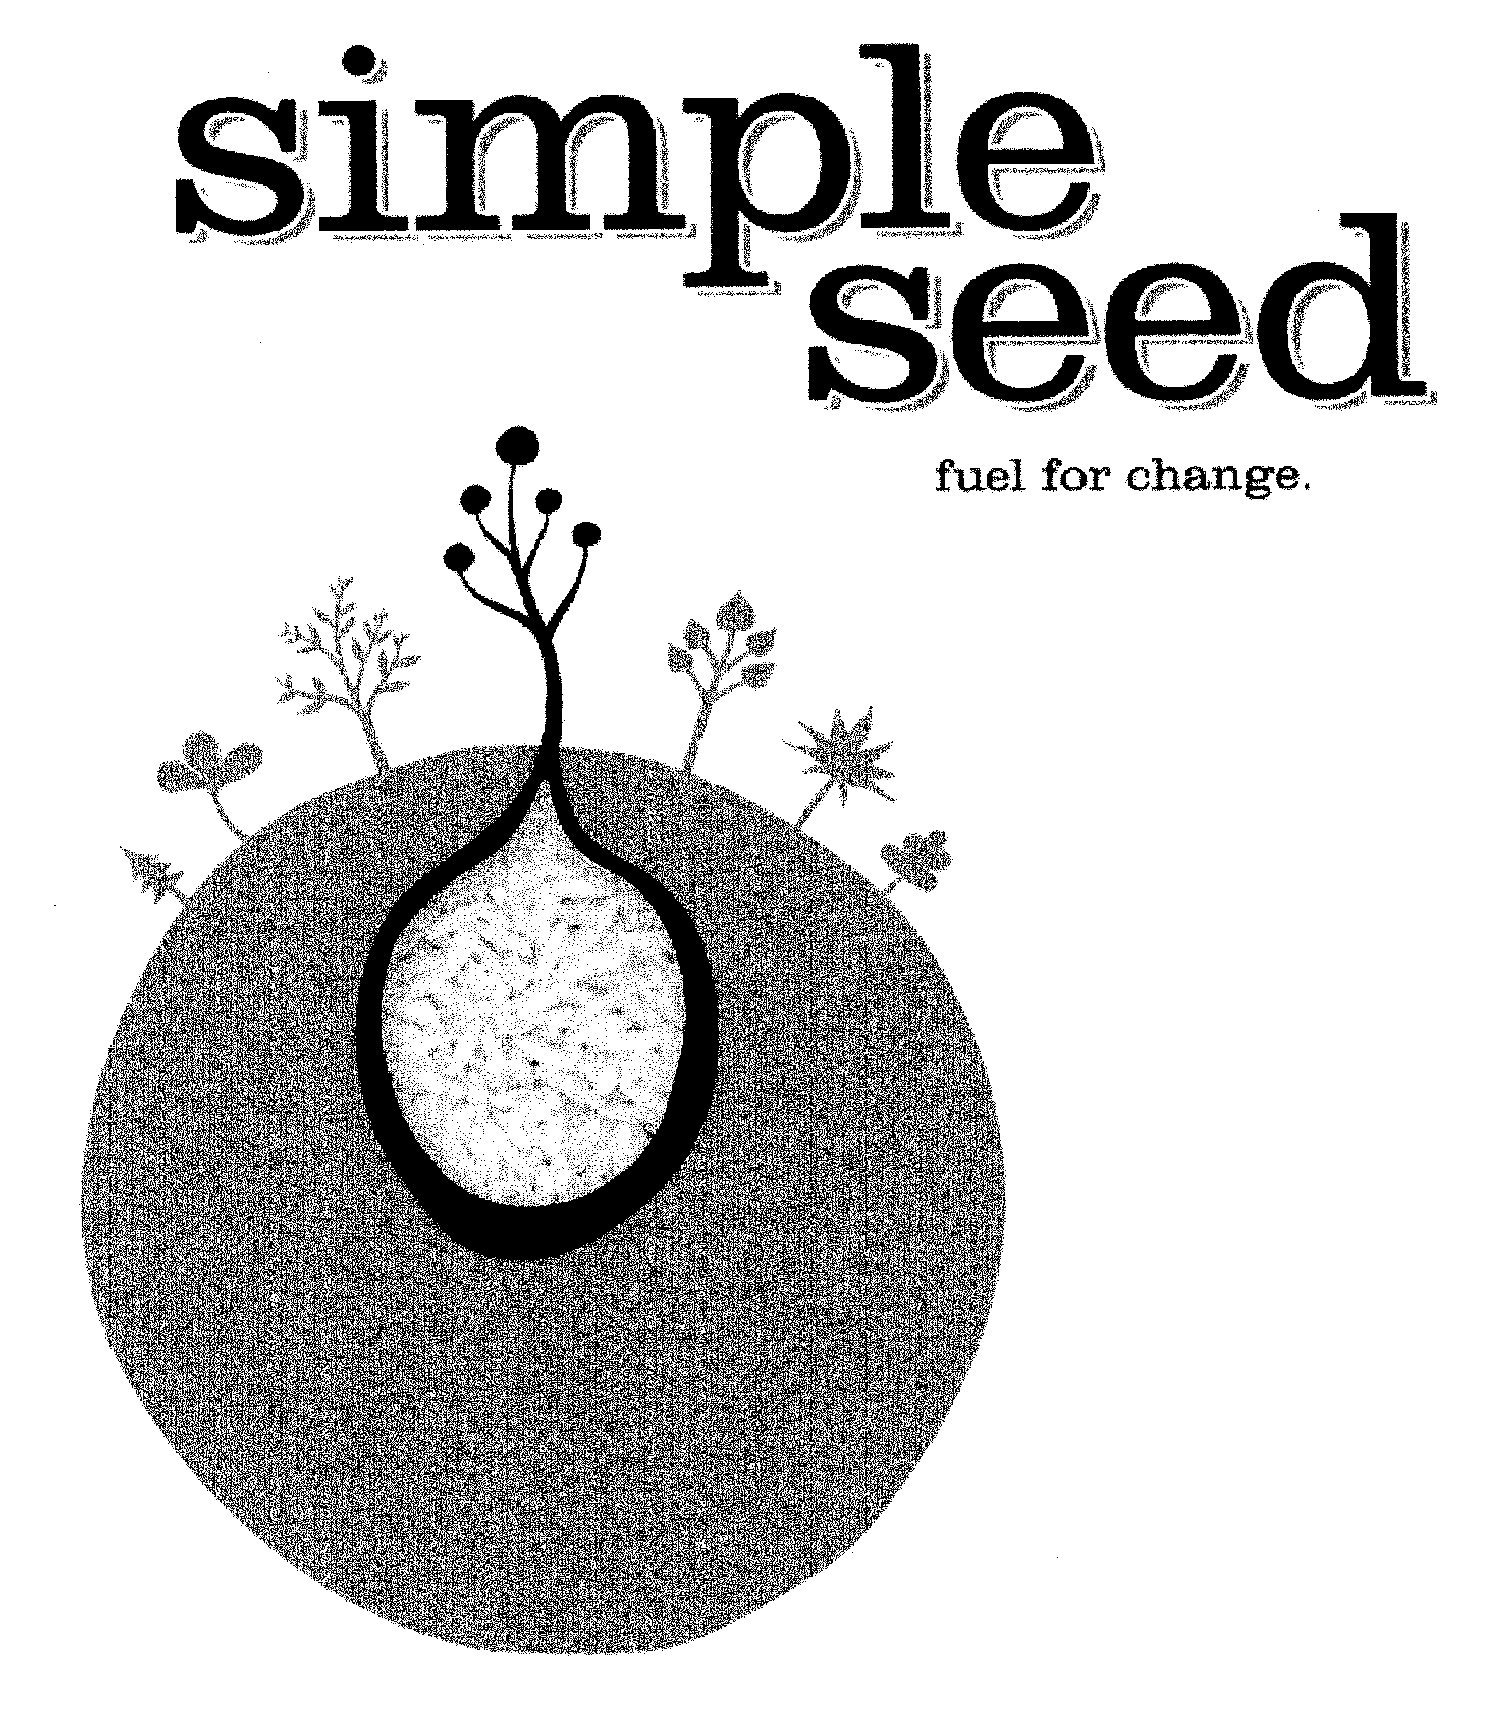  SIMPLE SEED FUEL FOR CHANGE.